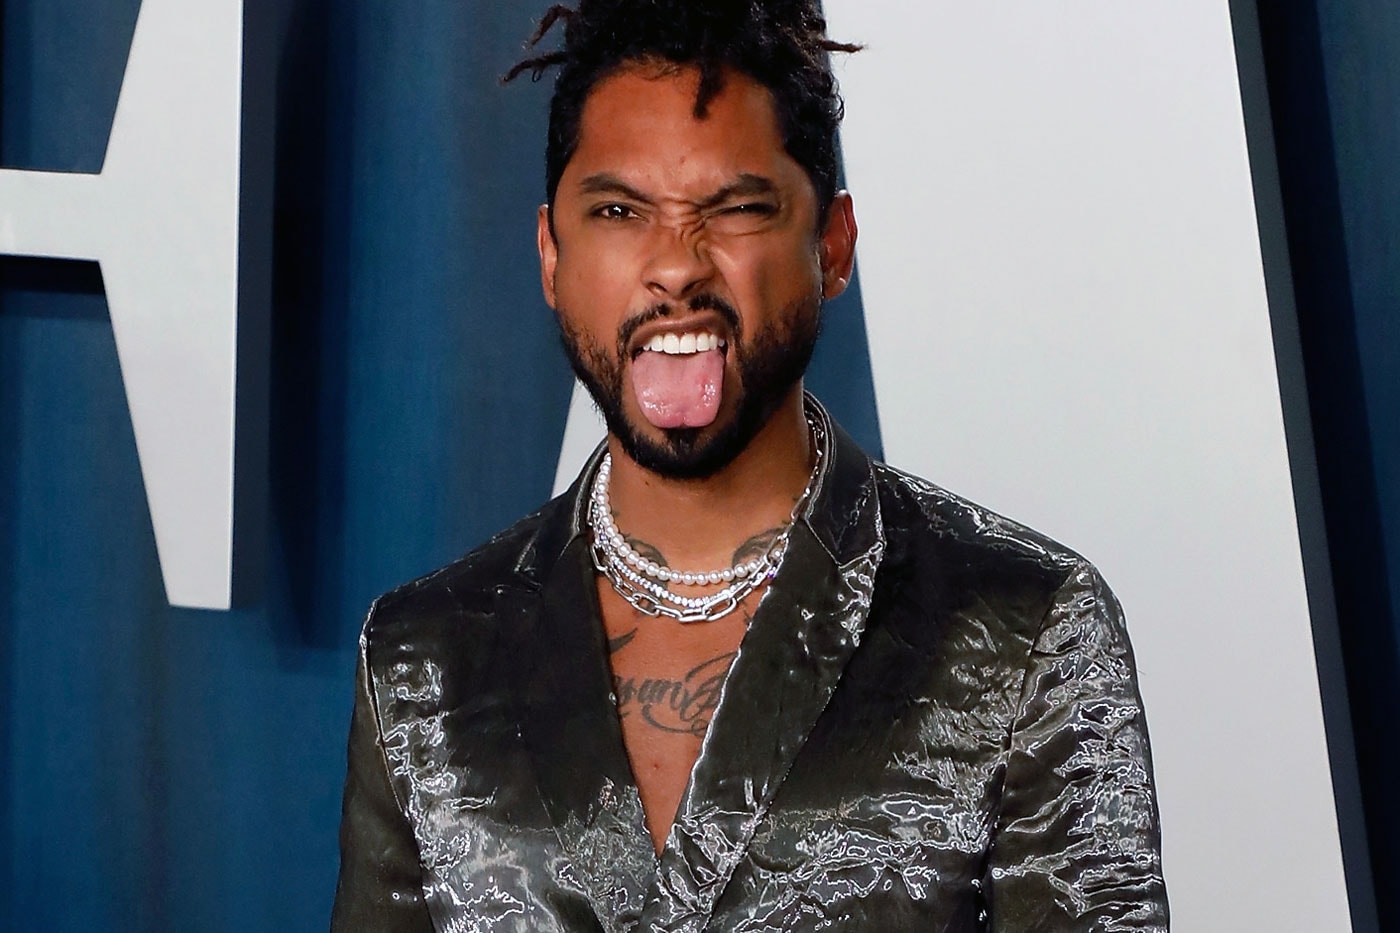 Listen to Miguel's Cover of Beyoncé's "Crazy In Love" in 'Fifty Shades Darker' Trailer